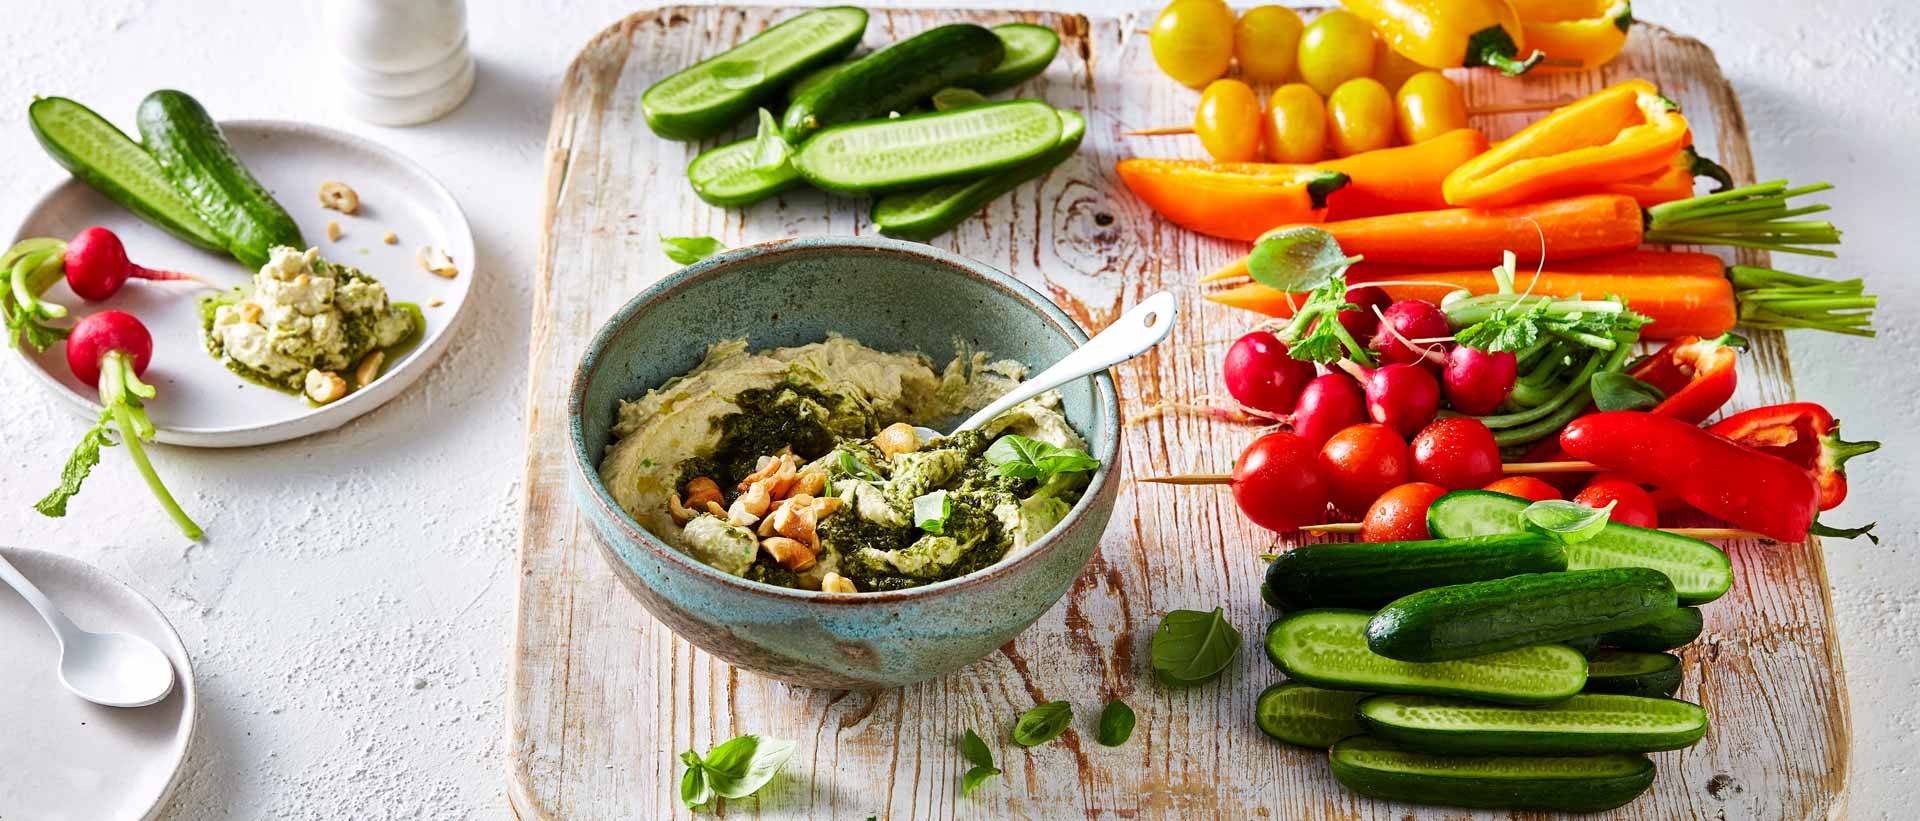 Qukes Rainbow Vegetable Platter with Cashew Butter Guacamole Recipe 